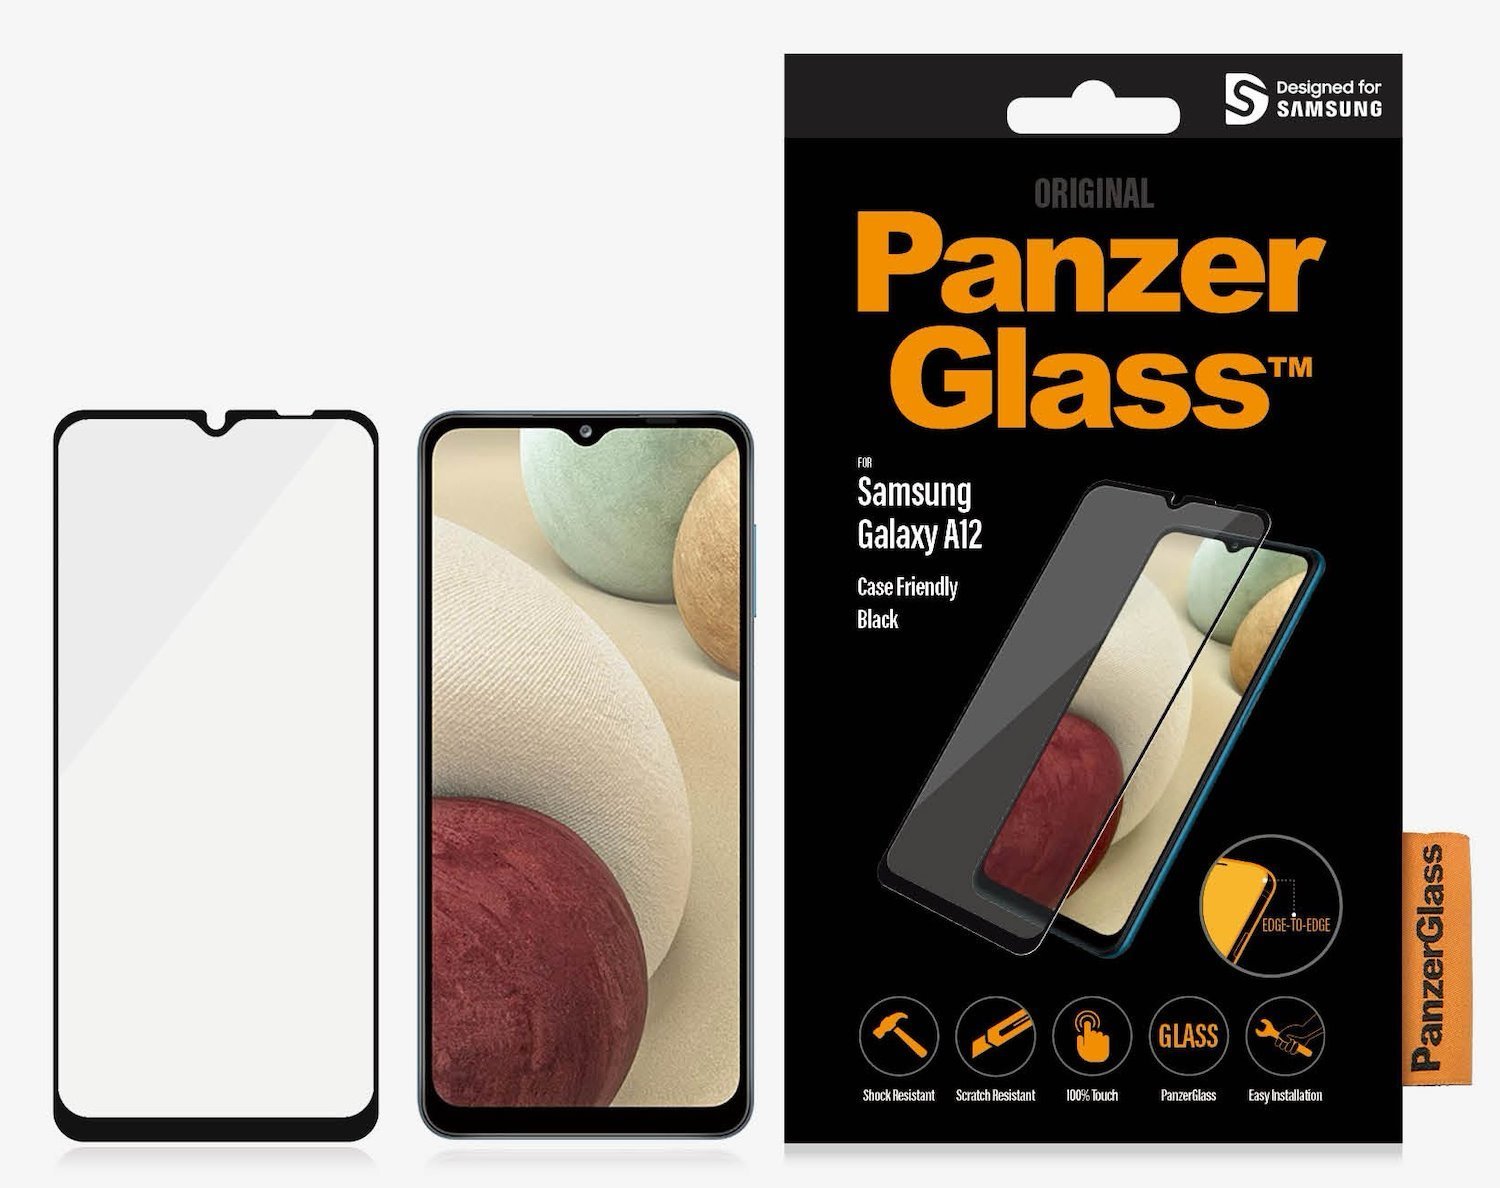 PanzerGlass Entry Level Screen Protector For Samsung Galaxy A12 - Black - Full Frame Coverage, Rounded Edges, Crystal Clear